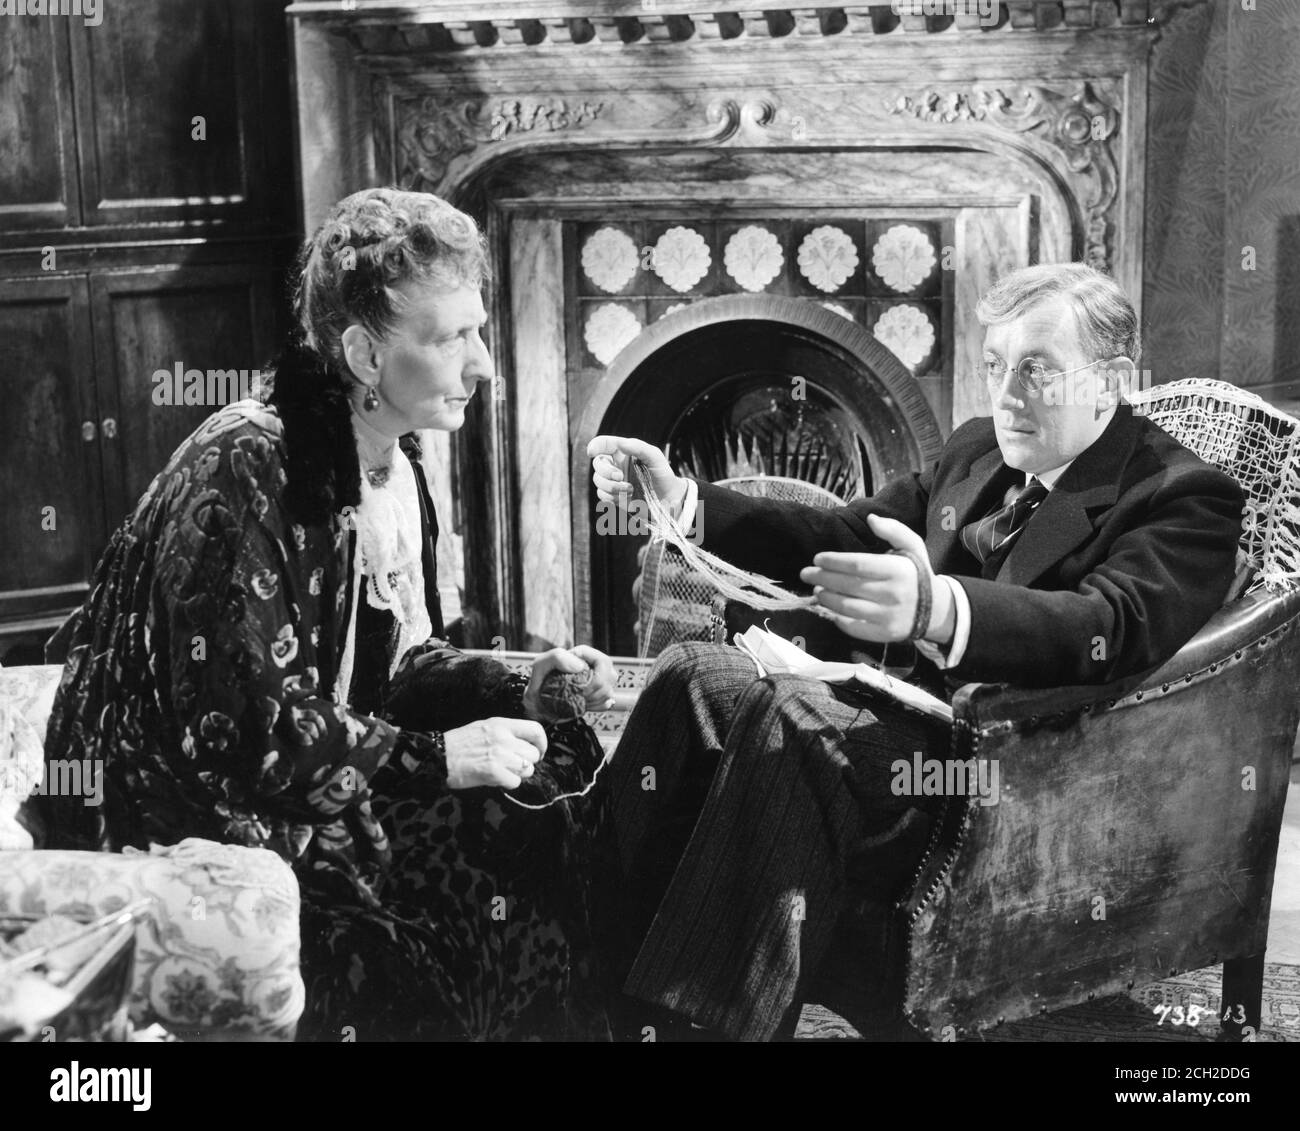 MARJORIE FIELDING and ALEC GUINNESS in THE LAVENDER HILL MOB 1951 director CHARLES CRICHTON original screenplay T.E.B. CLARKE producer MICHAEL BALCON Ealing Studios / General Film Distributors (GFD) Stock Photo